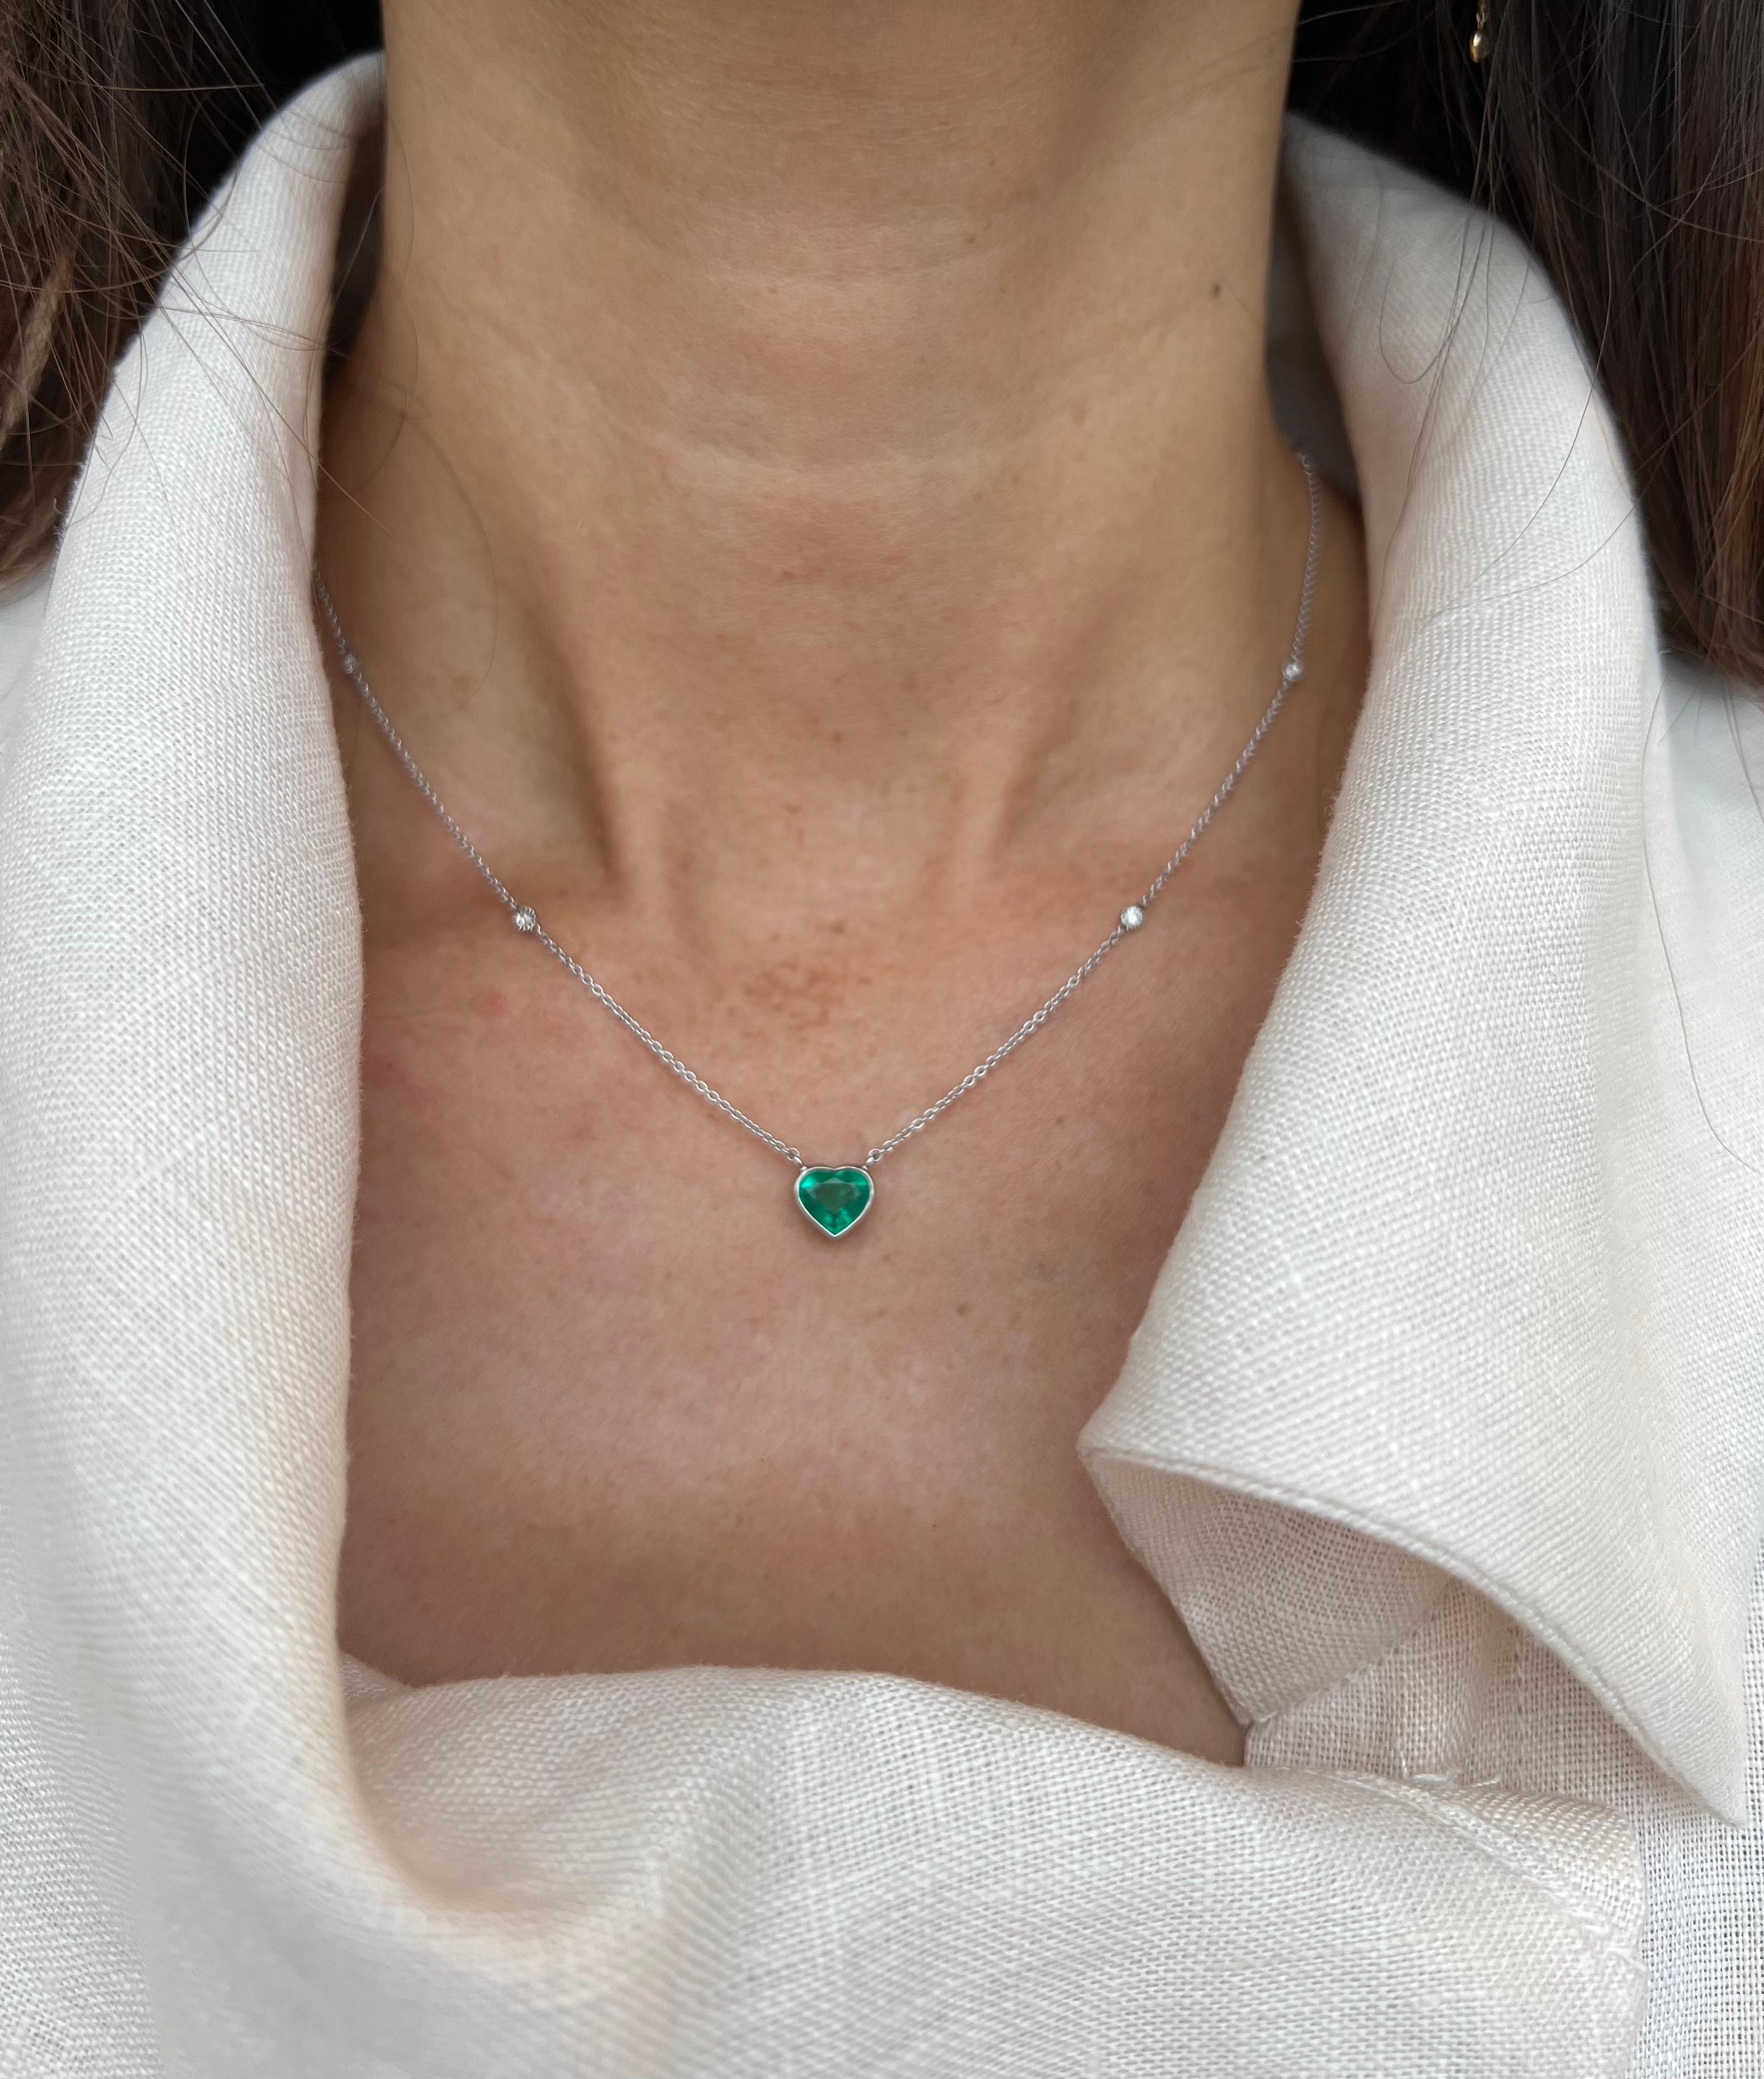 Striking vivid green heart-shaped emerald weighing 1.18 carat is at center of this beautiful and elegant necklace. It is set in fine bezel. The platinum cable link chain is decorated with 8 round brilliant cut diamonds encircled with milgrain